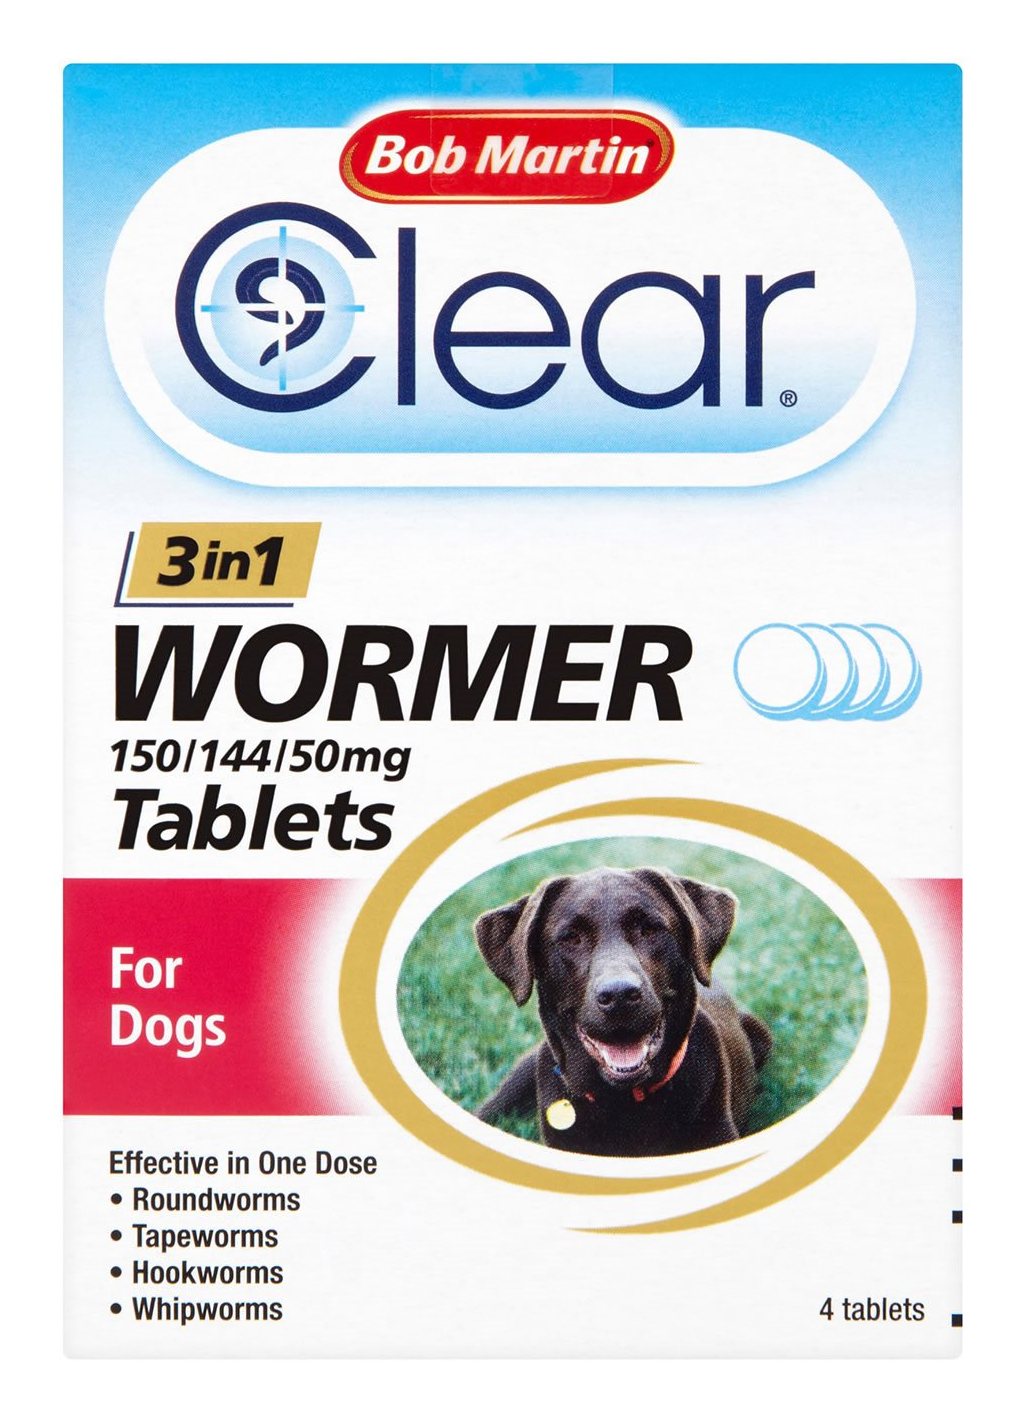 4 Tablets Bob Martin Bob Martin One Dose 3in1 Wormer Tablets Large Dog up to 40kg 